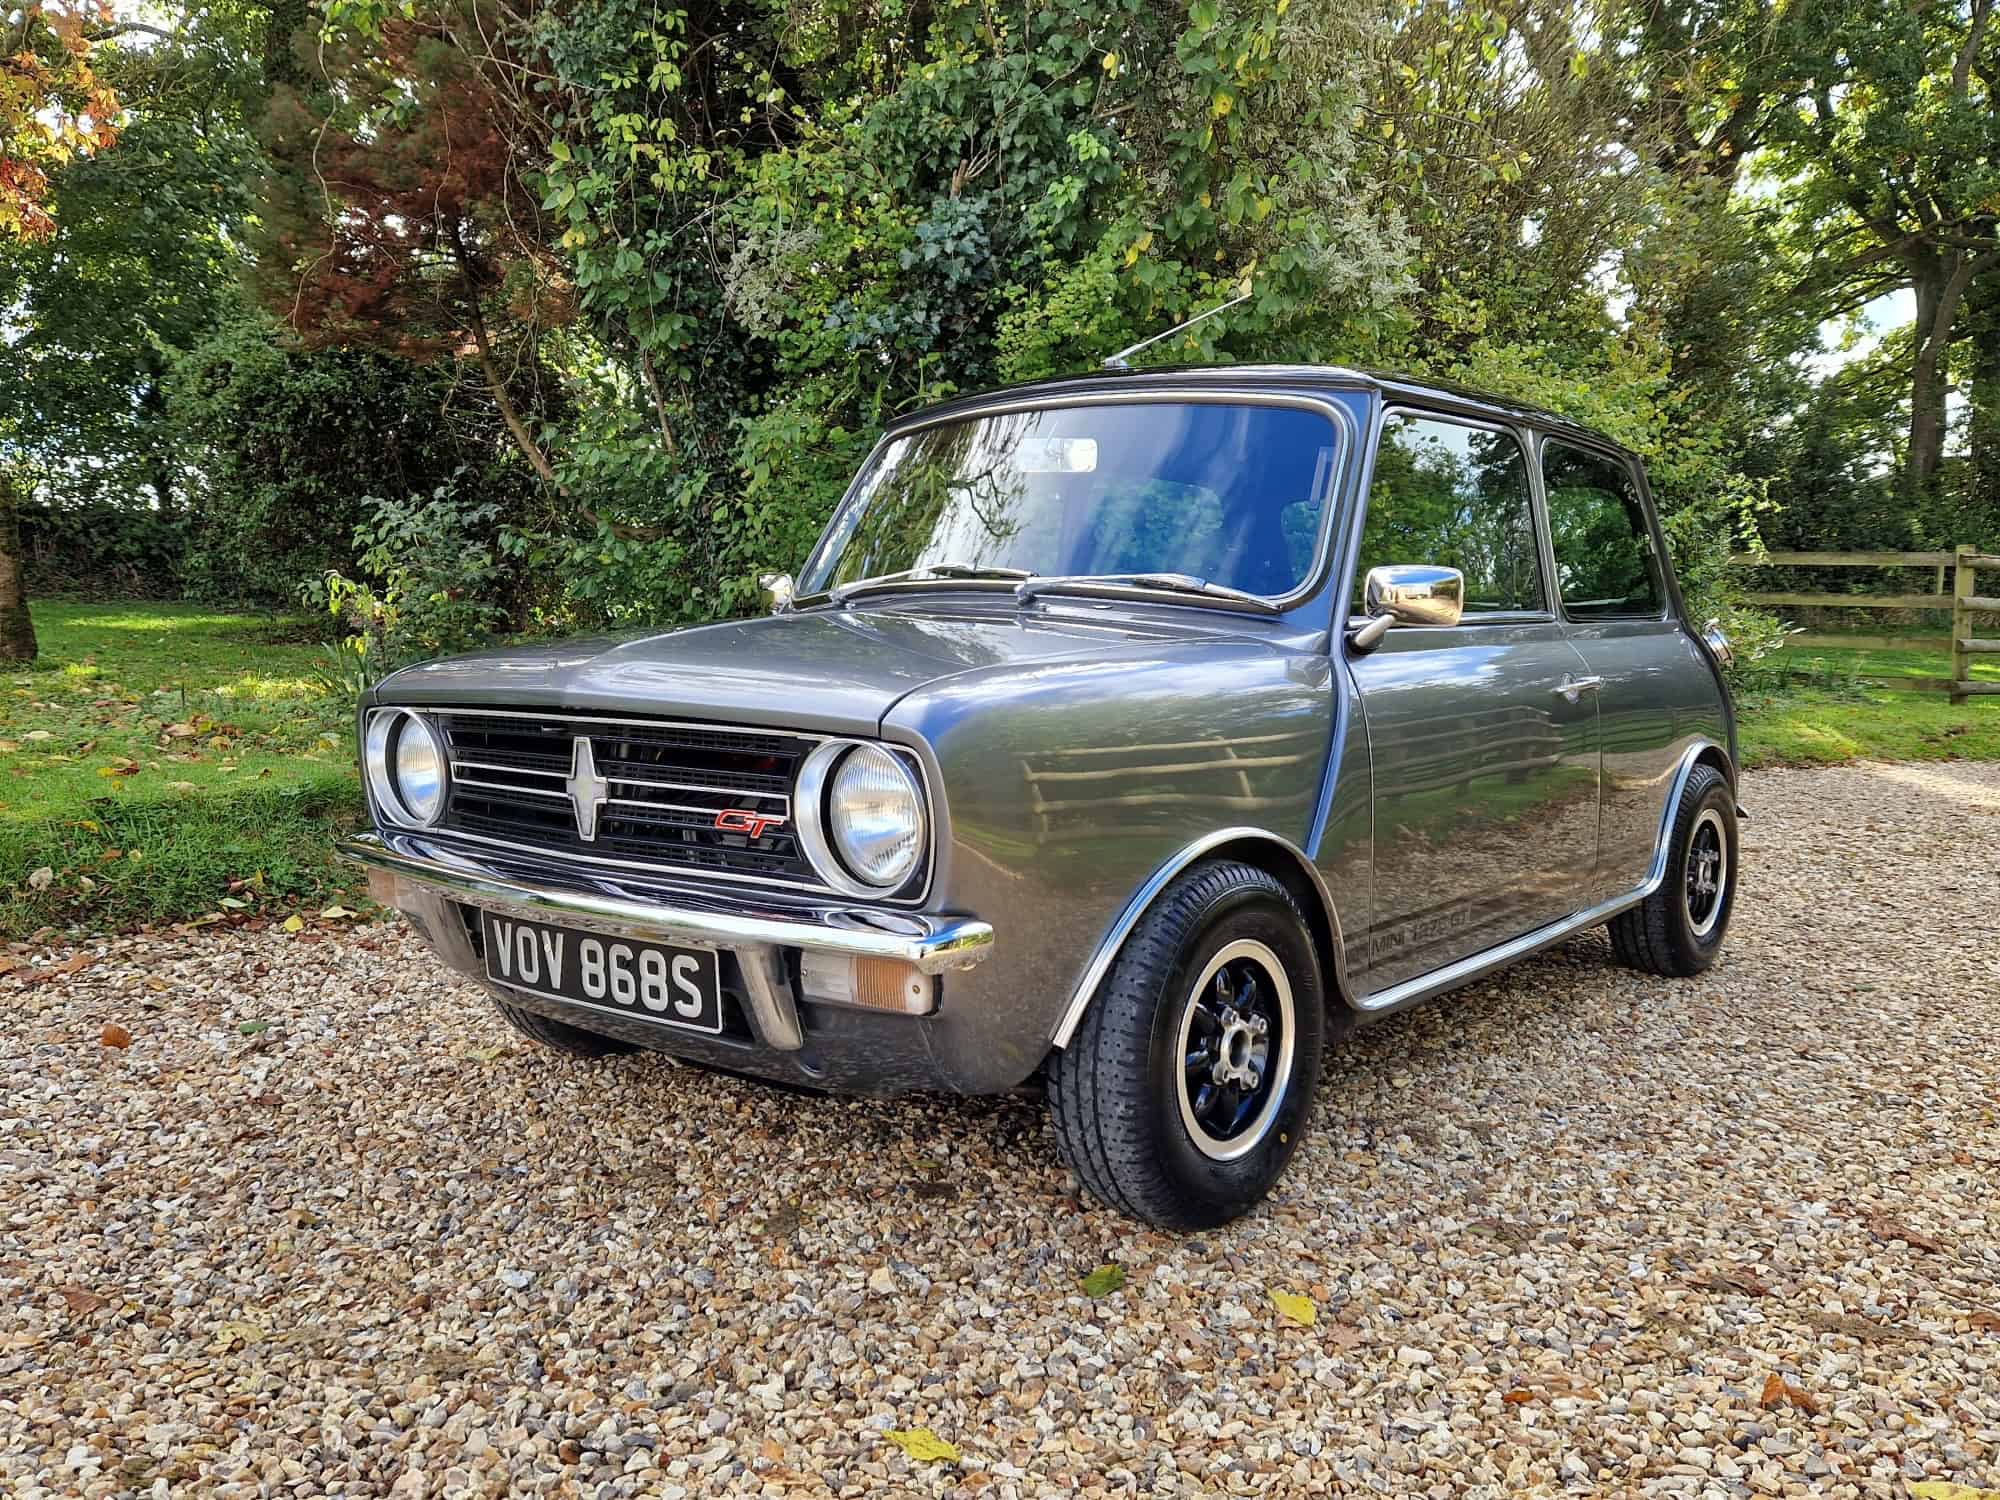 ** NOW SOLD ** 1978 Mini Clubman 1380 cc Fast Road Built On A Heritage Body shell.